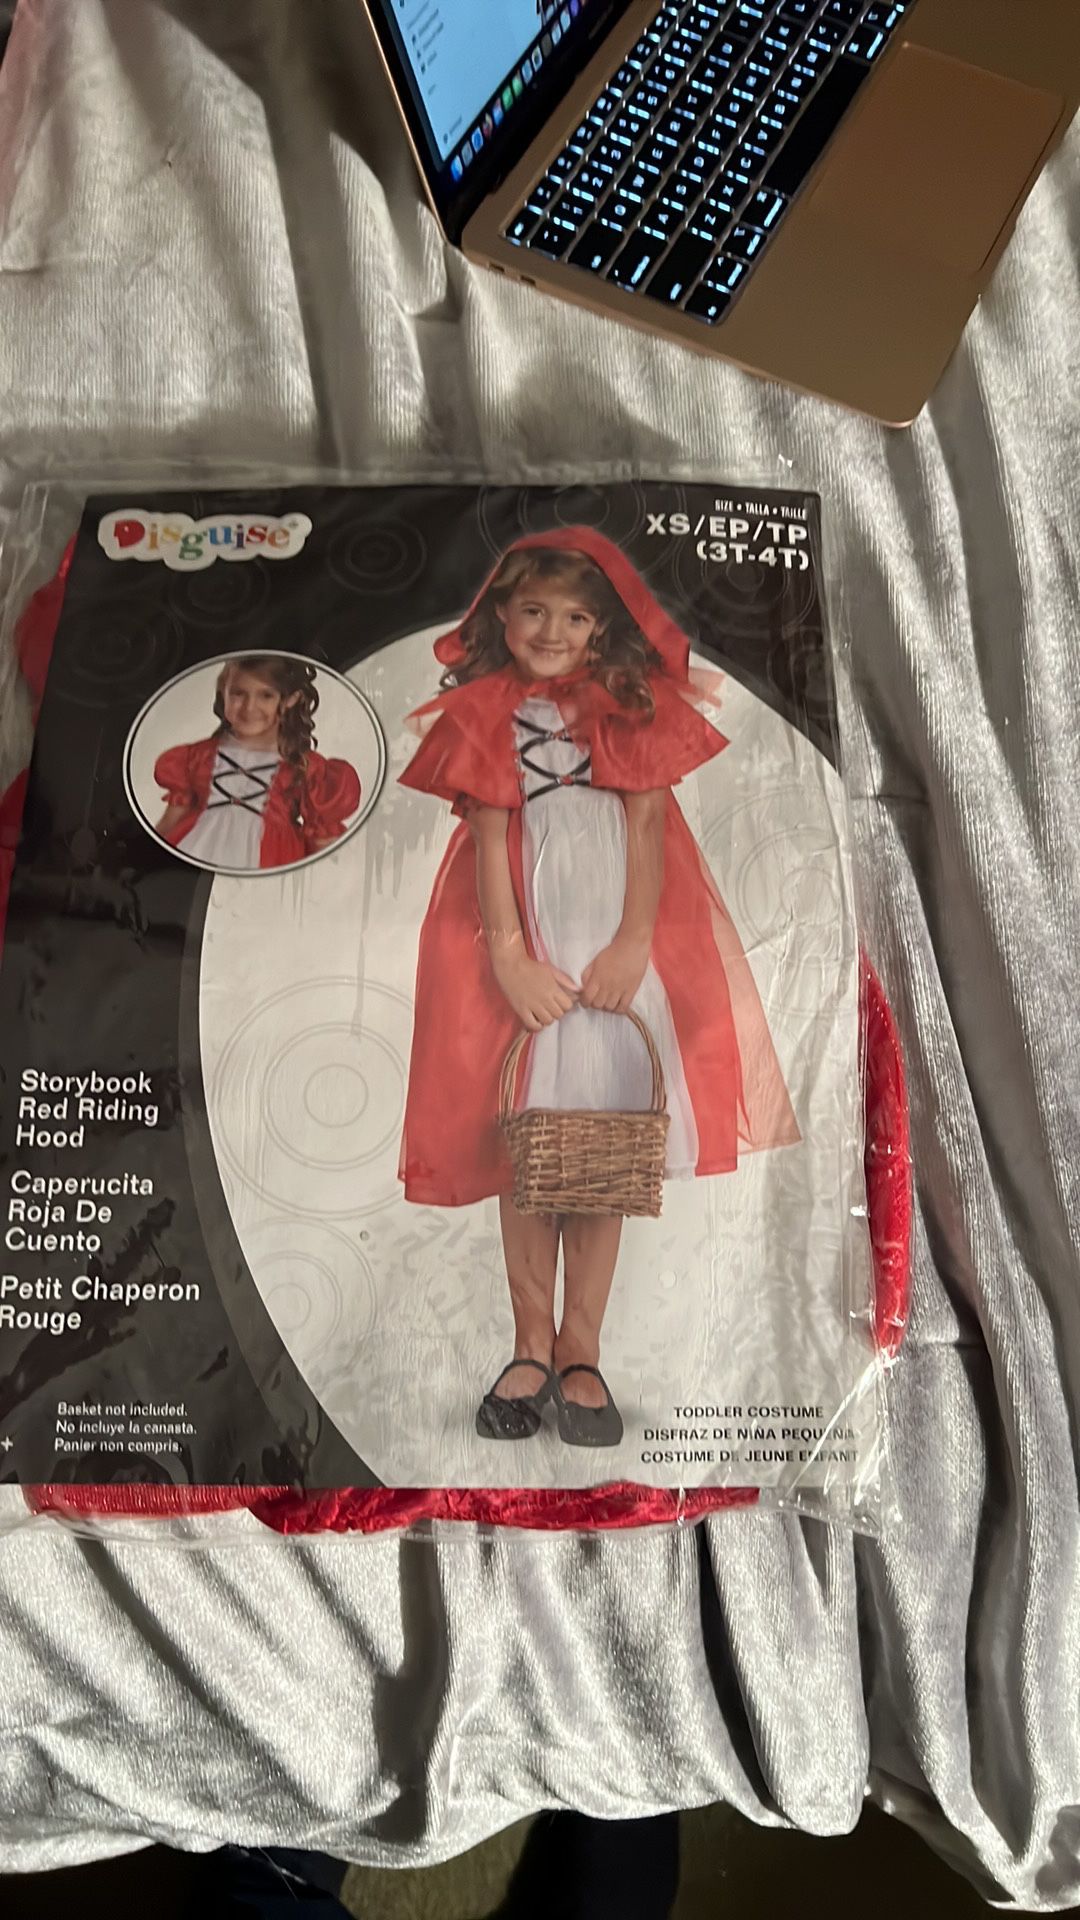 Little Red Riding Hood Costume Size 3T-4T